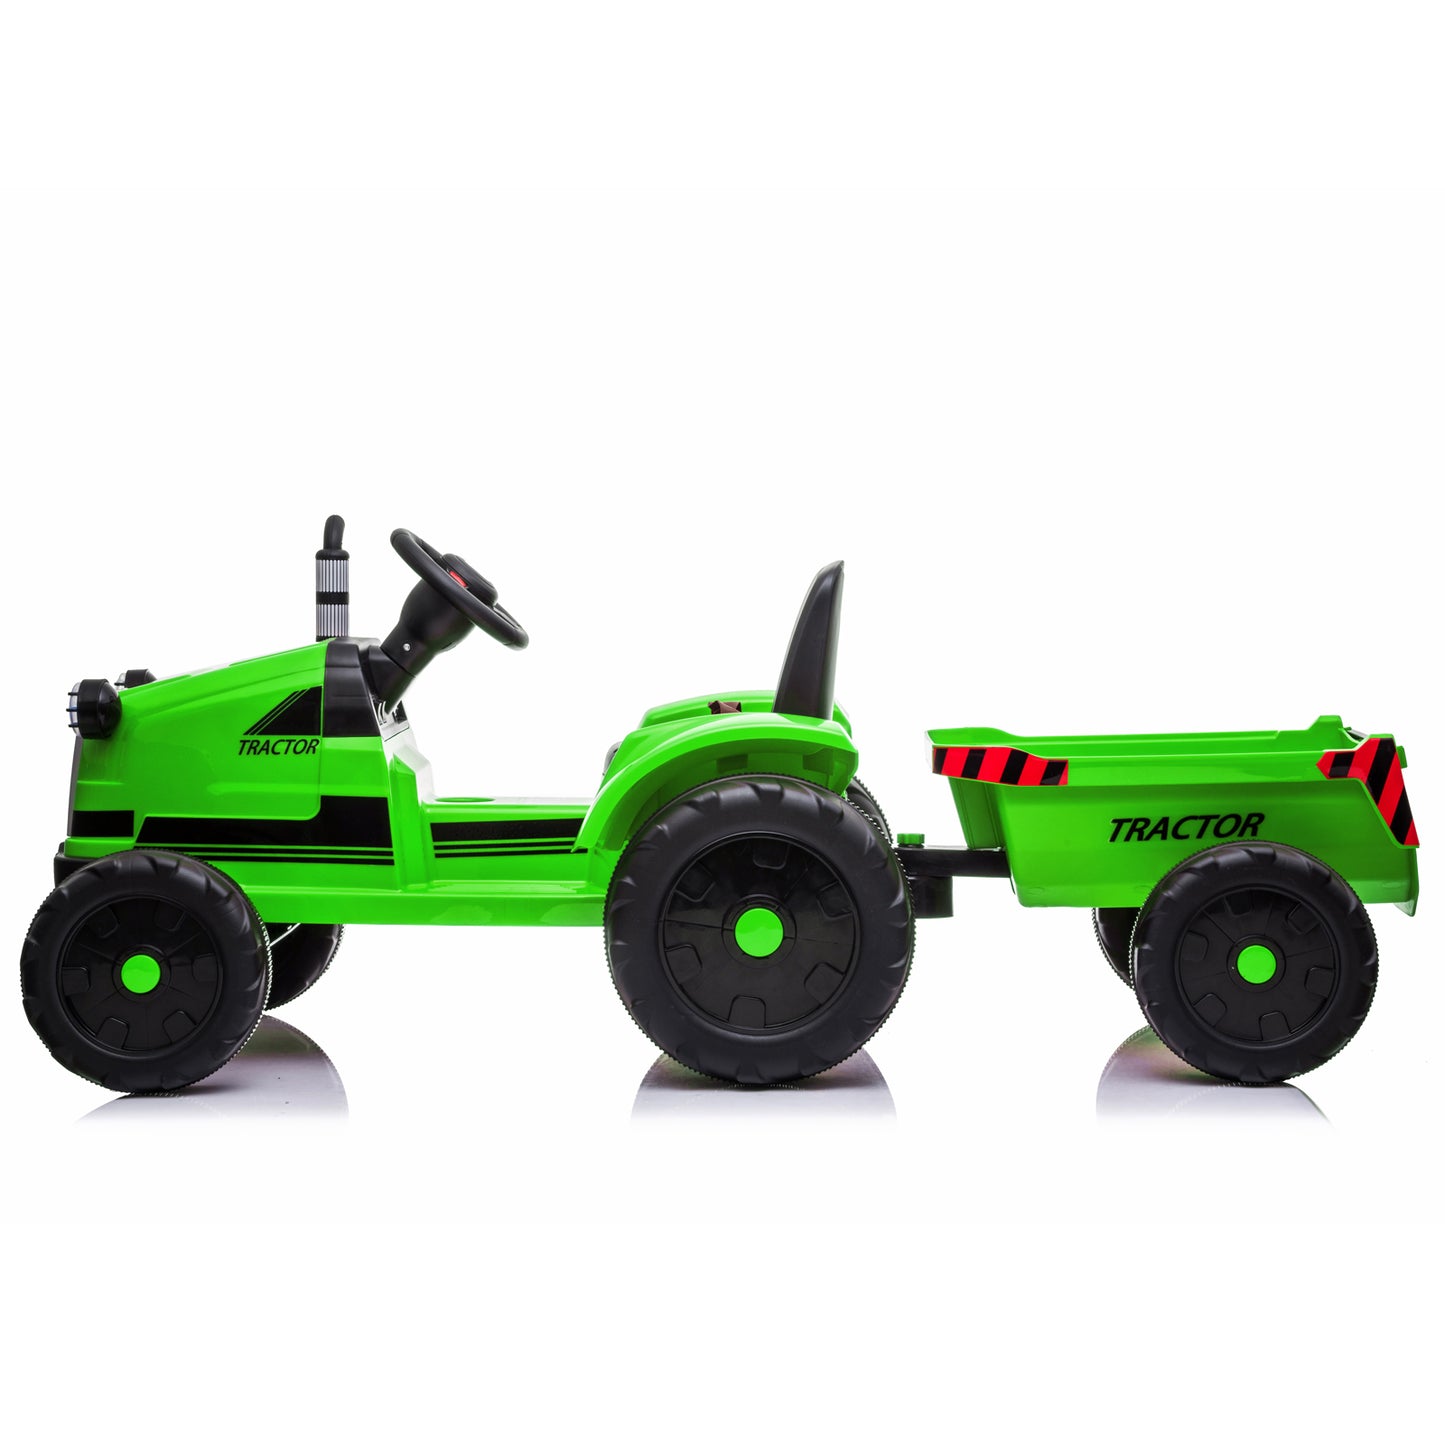 Toy Tractor with Trailer,3-Gear-Shift Ground Loader Ride On with LED Lights